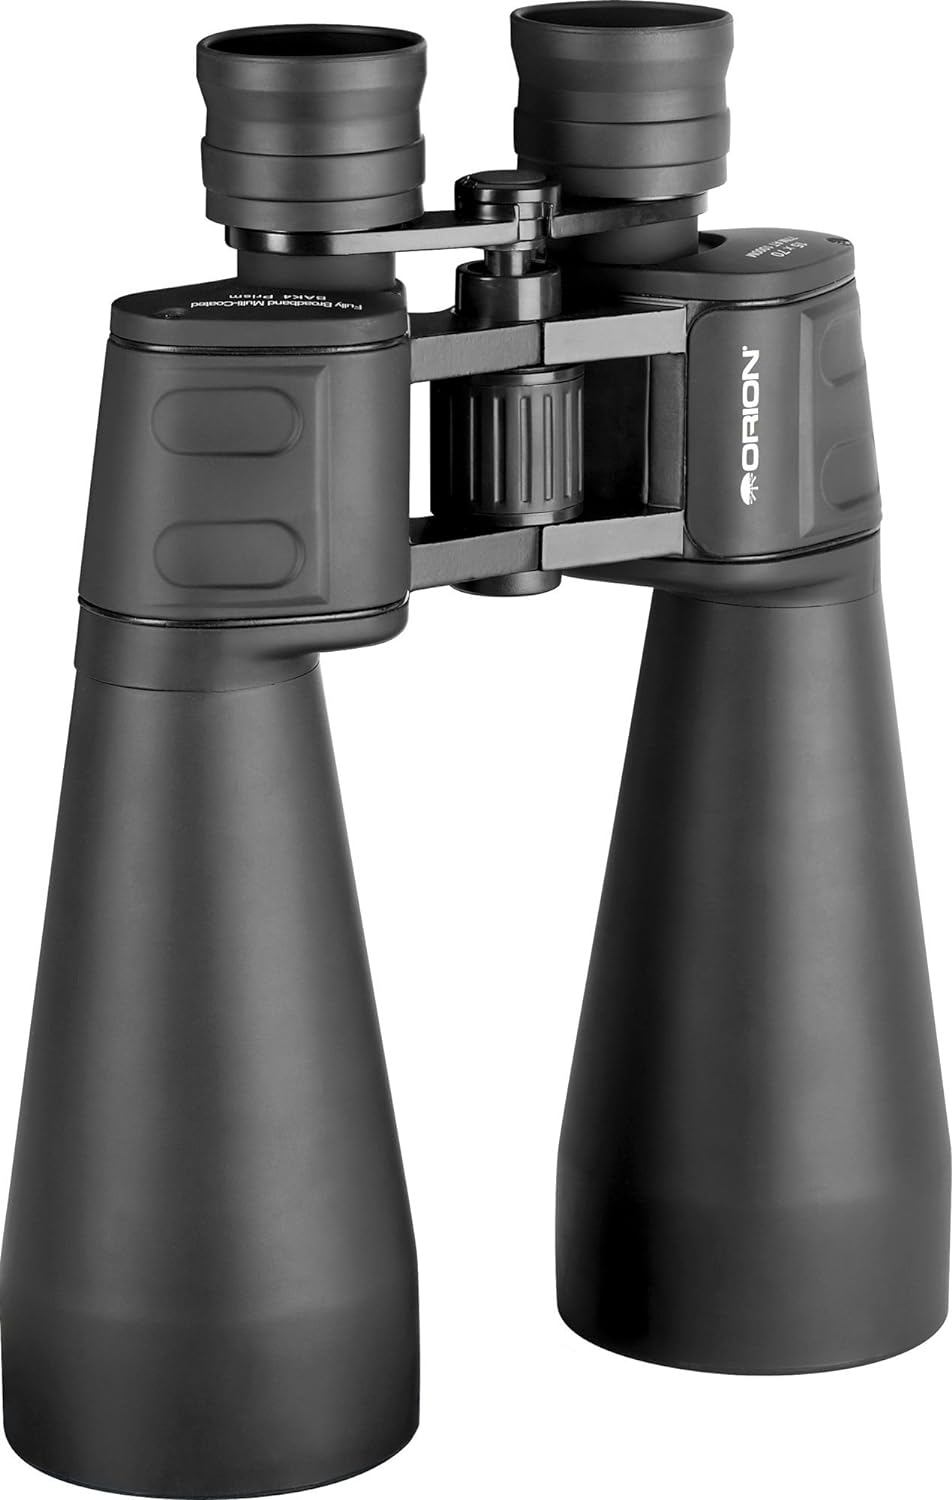 Orion 15x70 Astronomical Binocular  HD-F2 Tripod Bundle - Be Astounded with Great Views of Comets, Other Astronomical Objects, and Daytime Sights